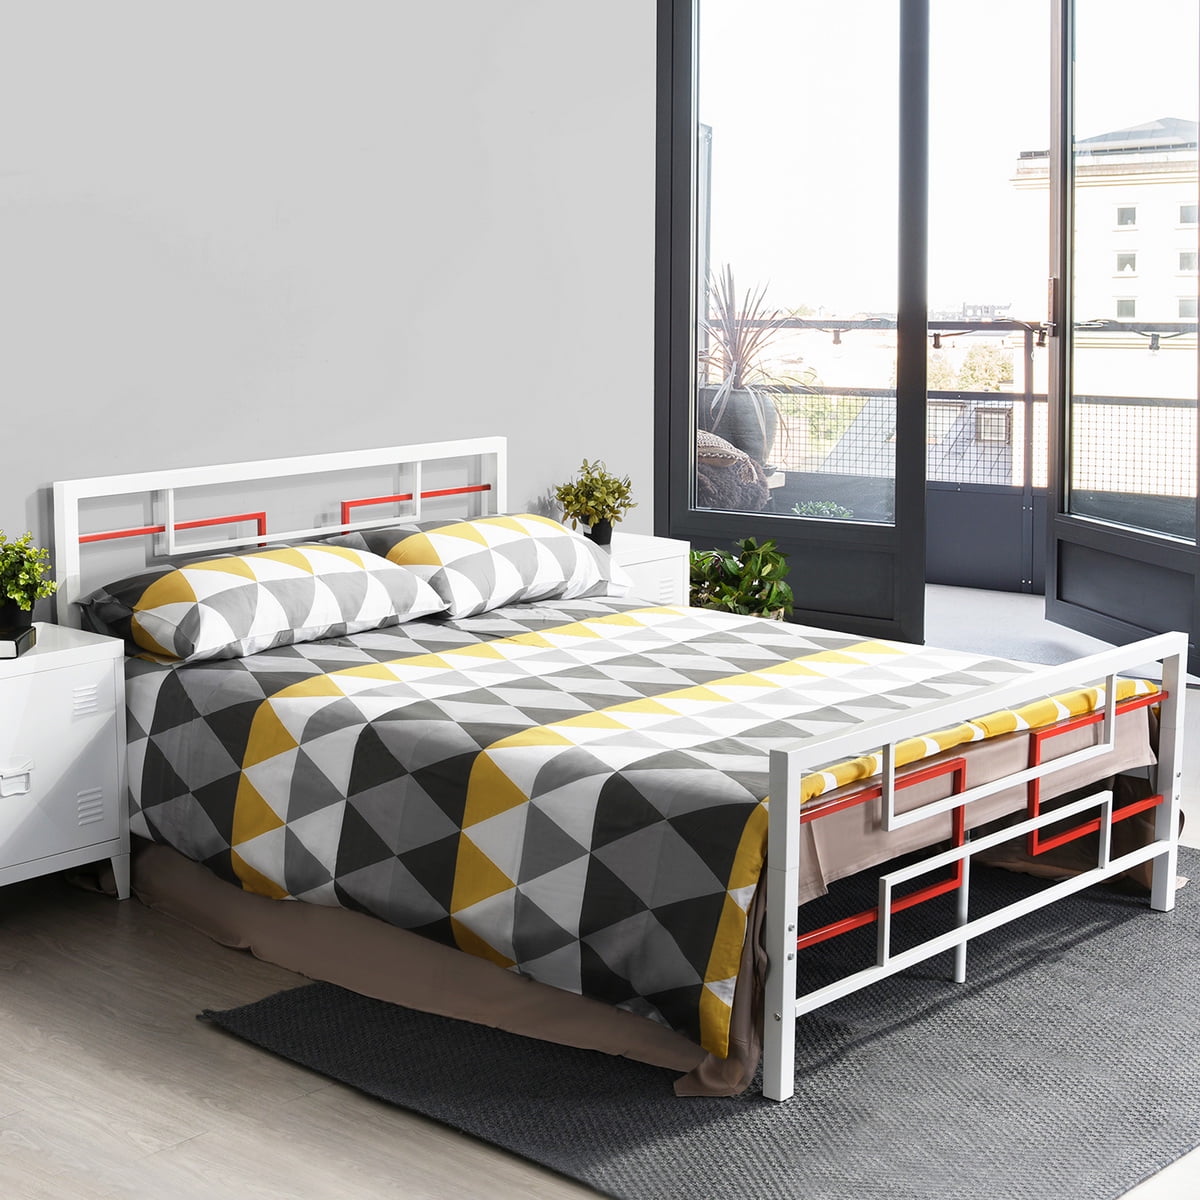 Metal Bed Platform Mattress Foundation, Single Bed Frame With Headboard And Footboard